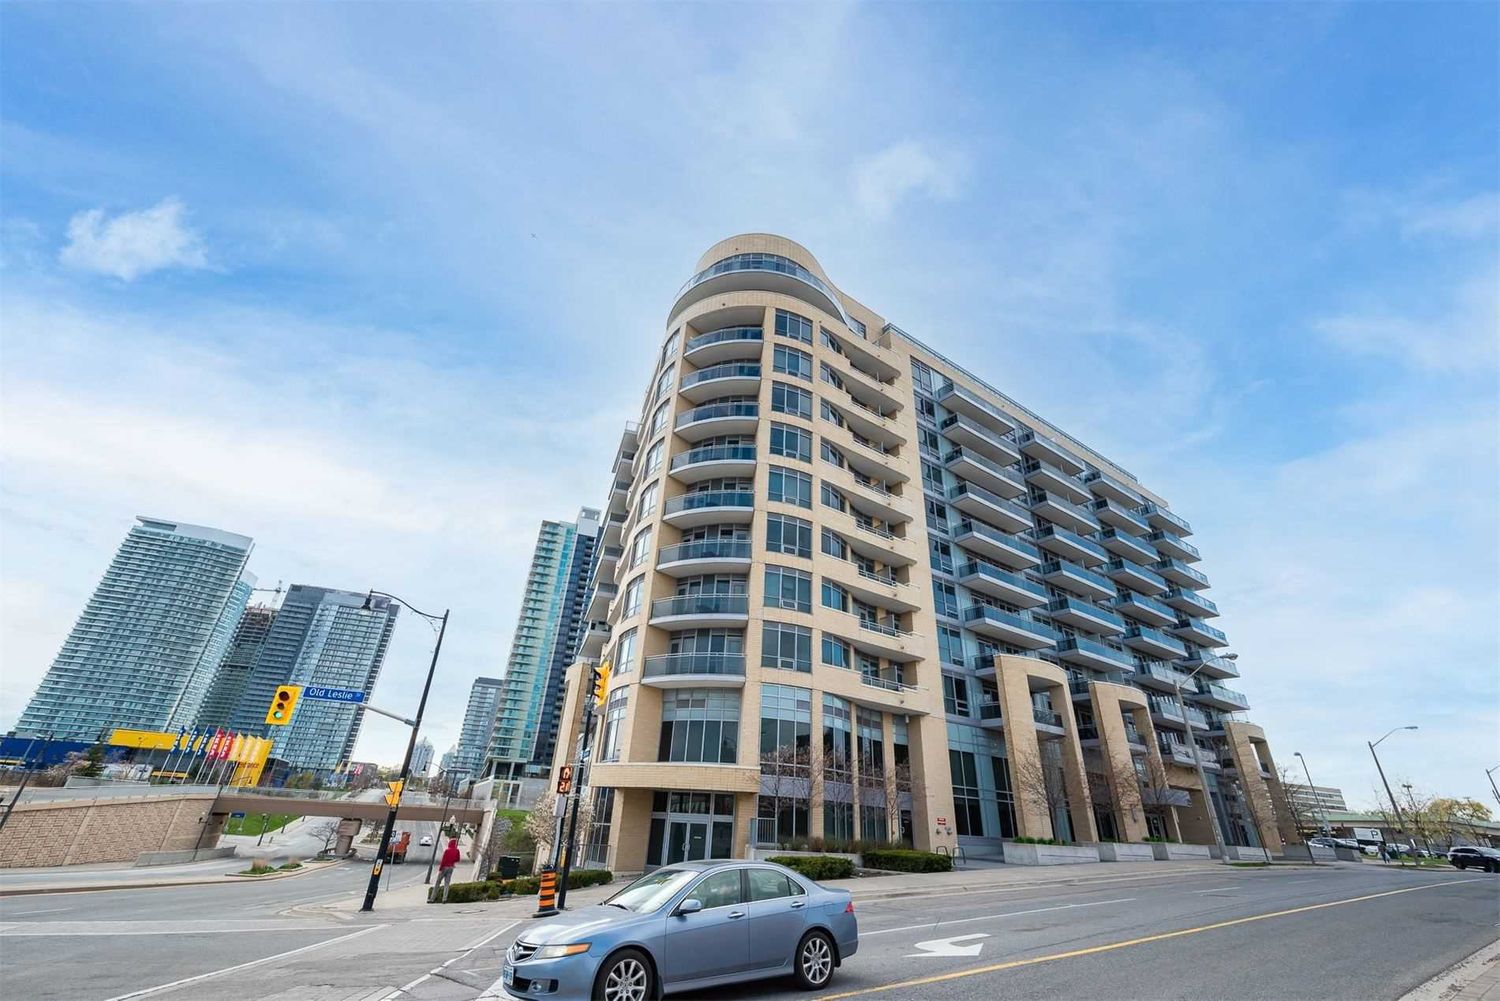 2756 Old Leslie Street. Leslie Boutique Residences is located in  North York, Toronto - image #2 of 2